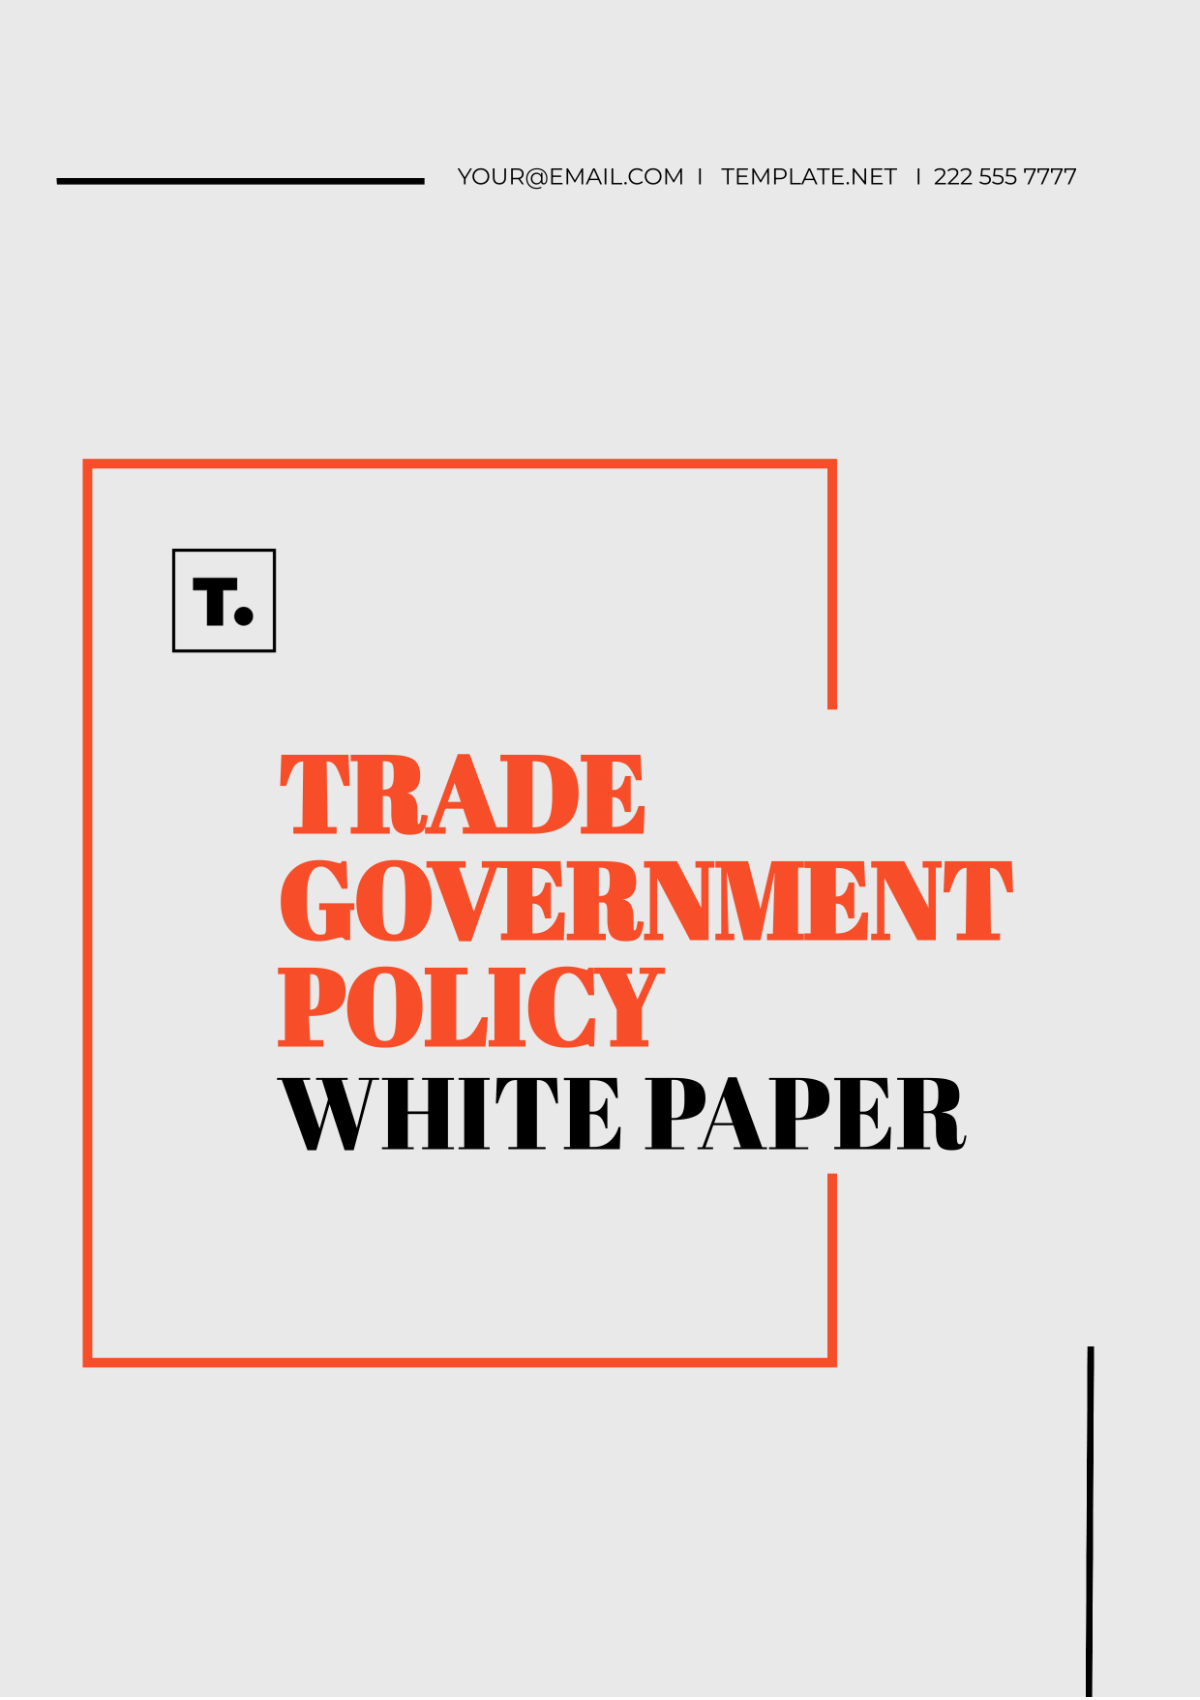 Trade Government Policy White Paper Template